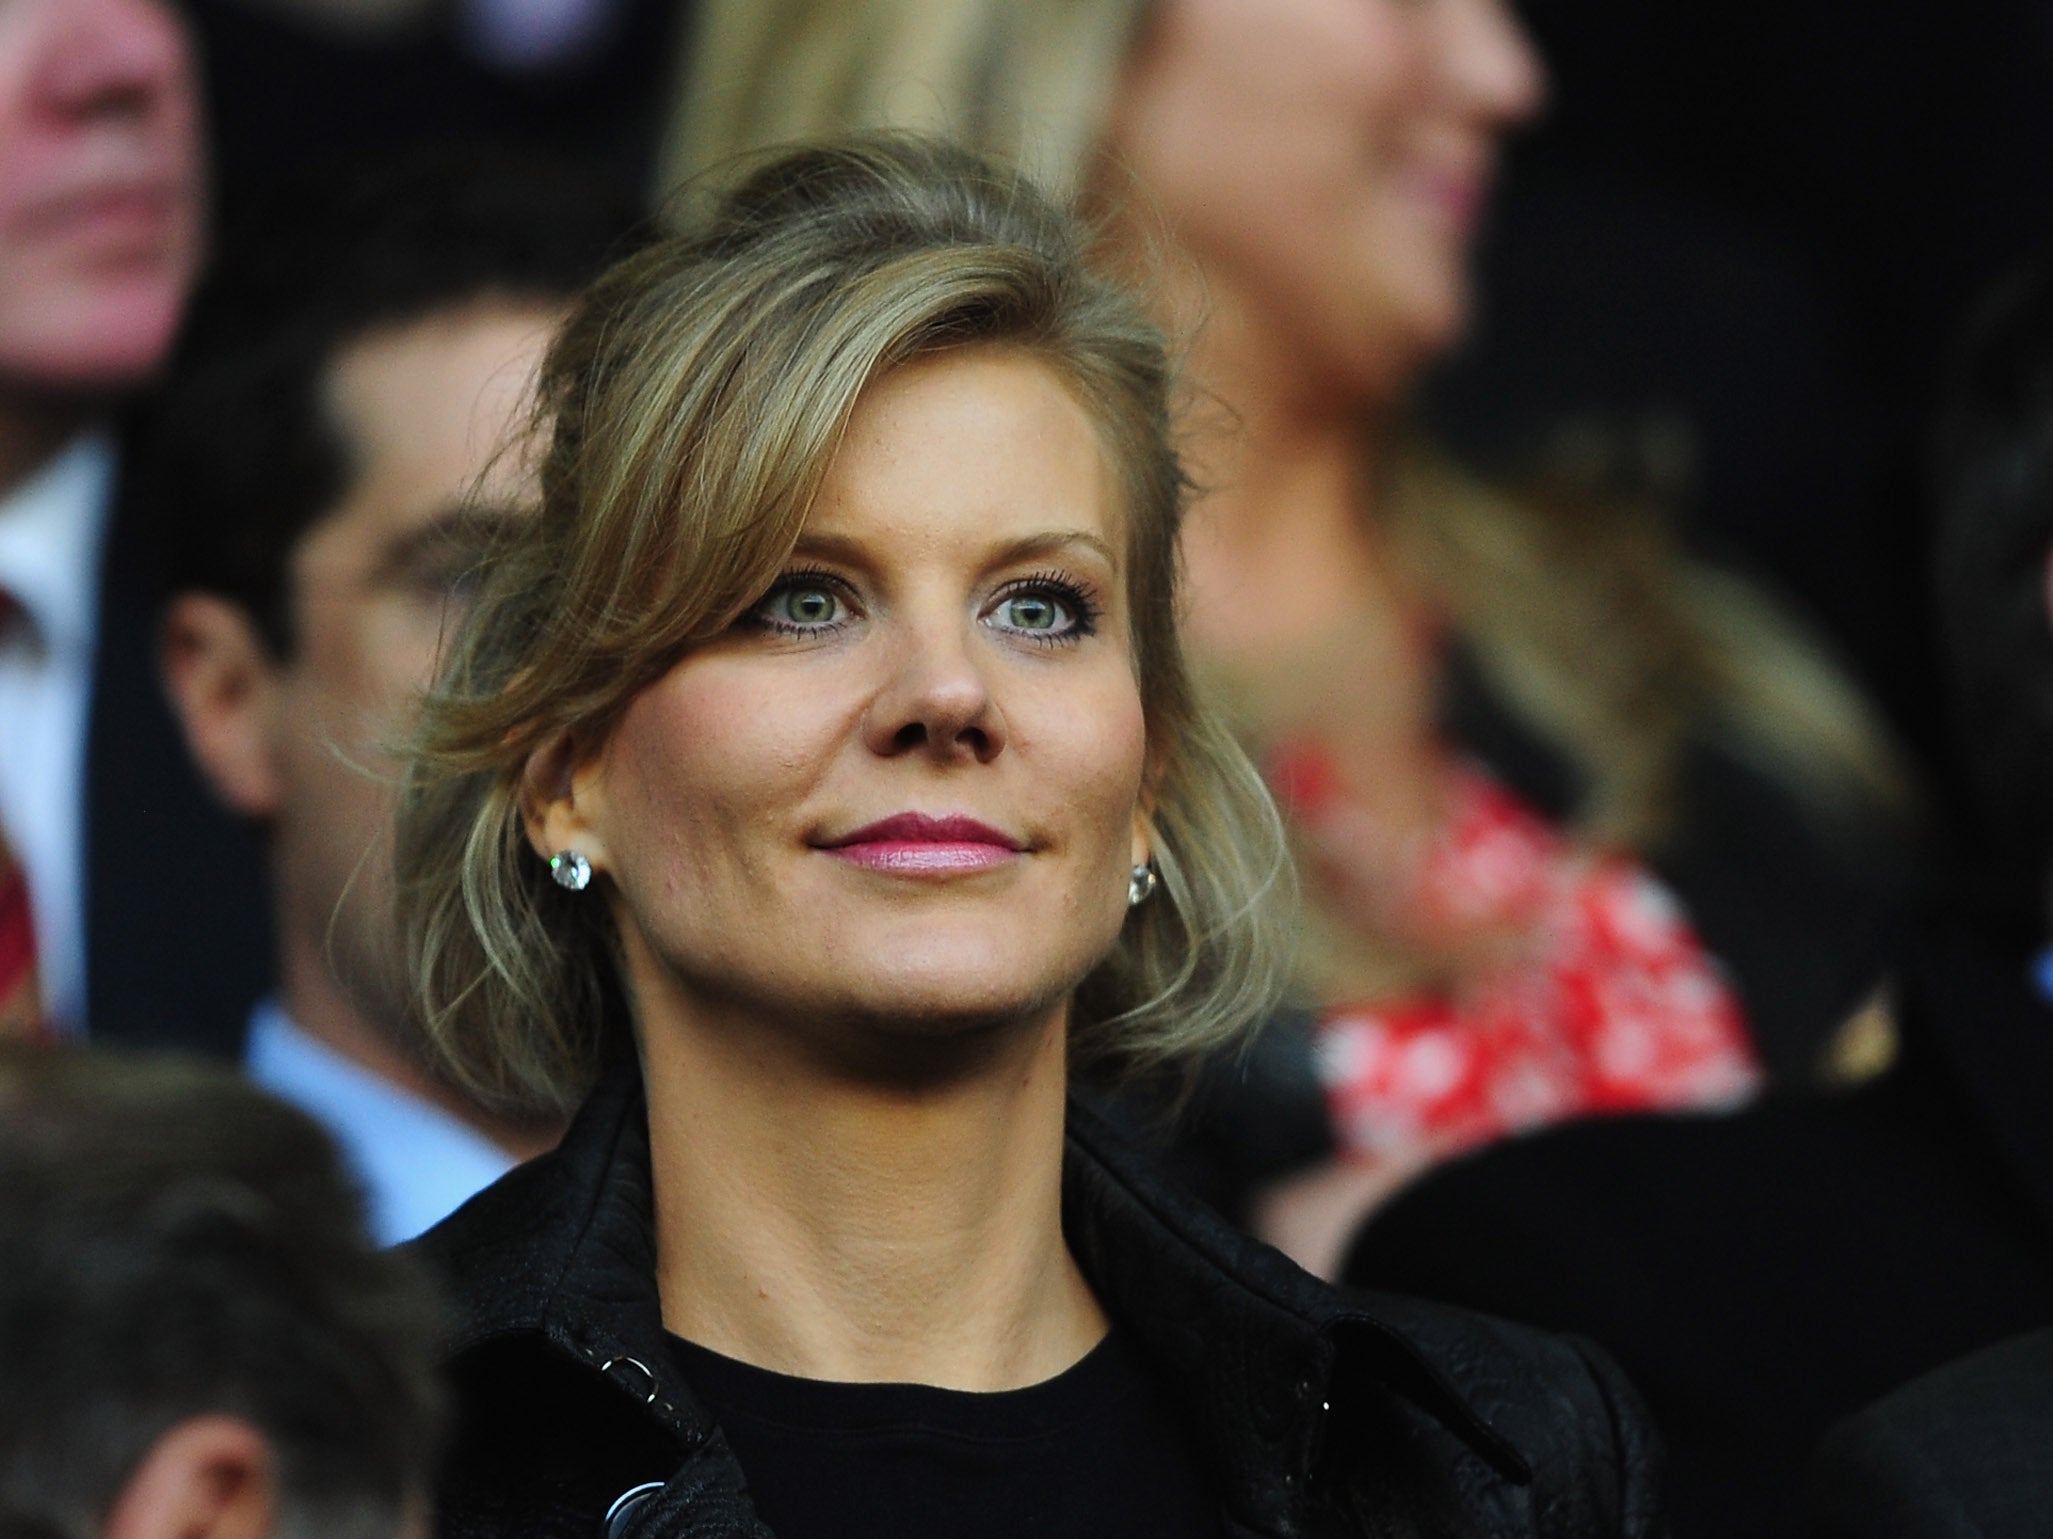 Amanda Staveley tried to broker deals for Liverpool on a number of occasions